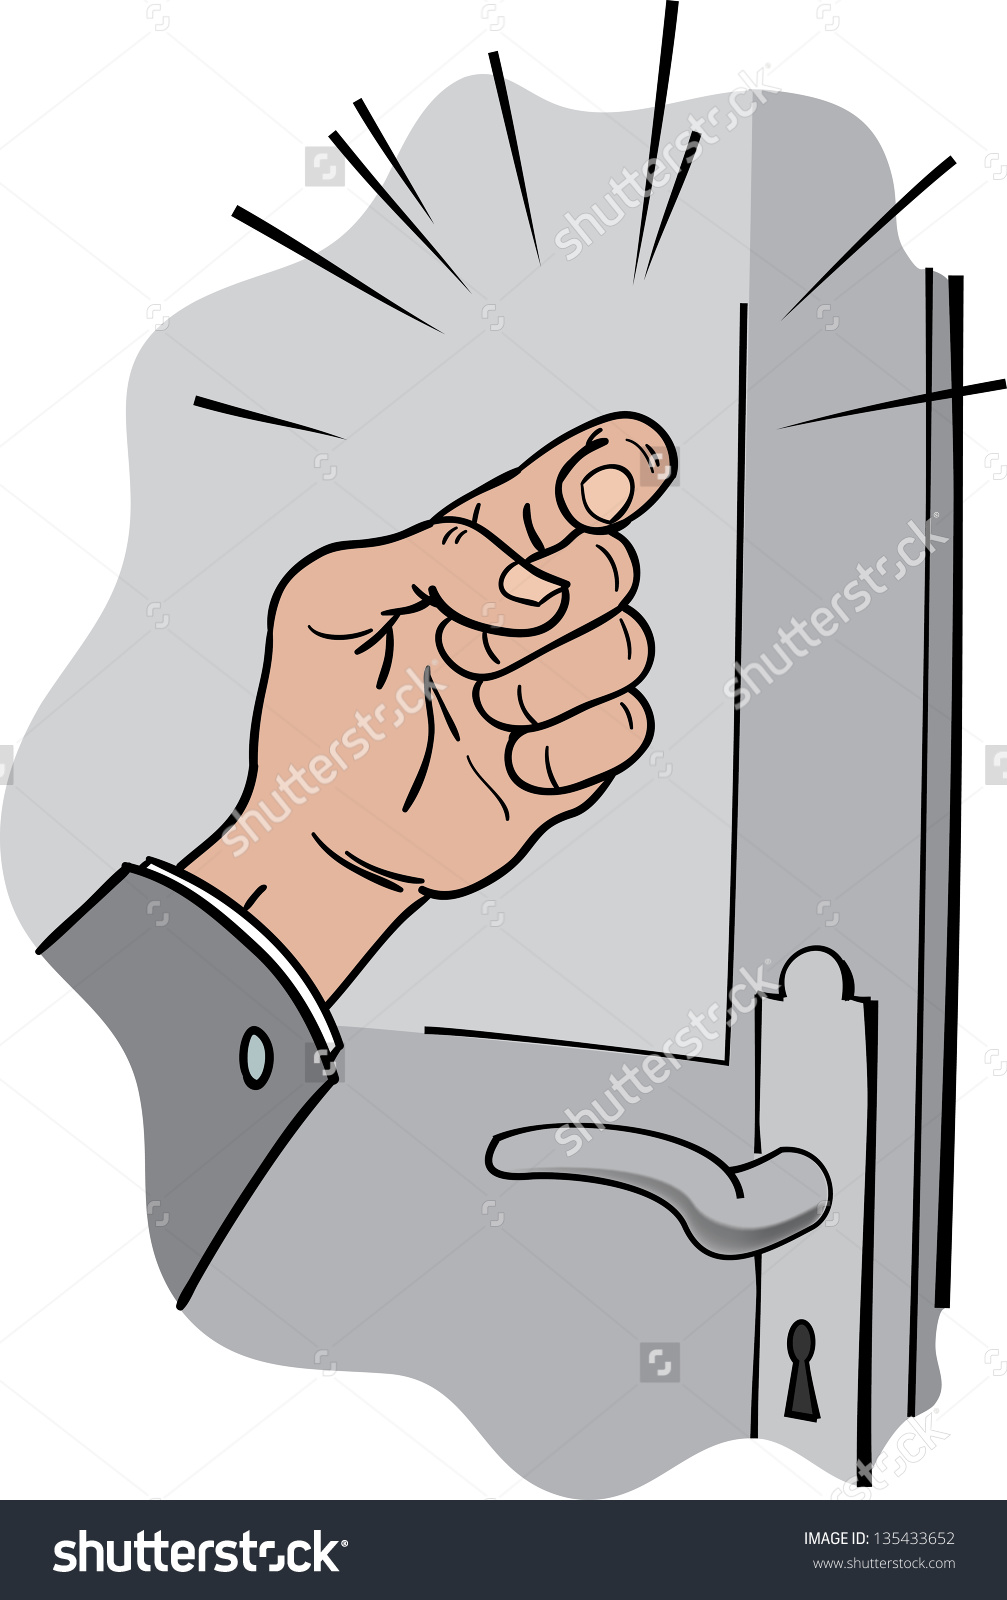 clipart of jesus knocking at the door - photo #39